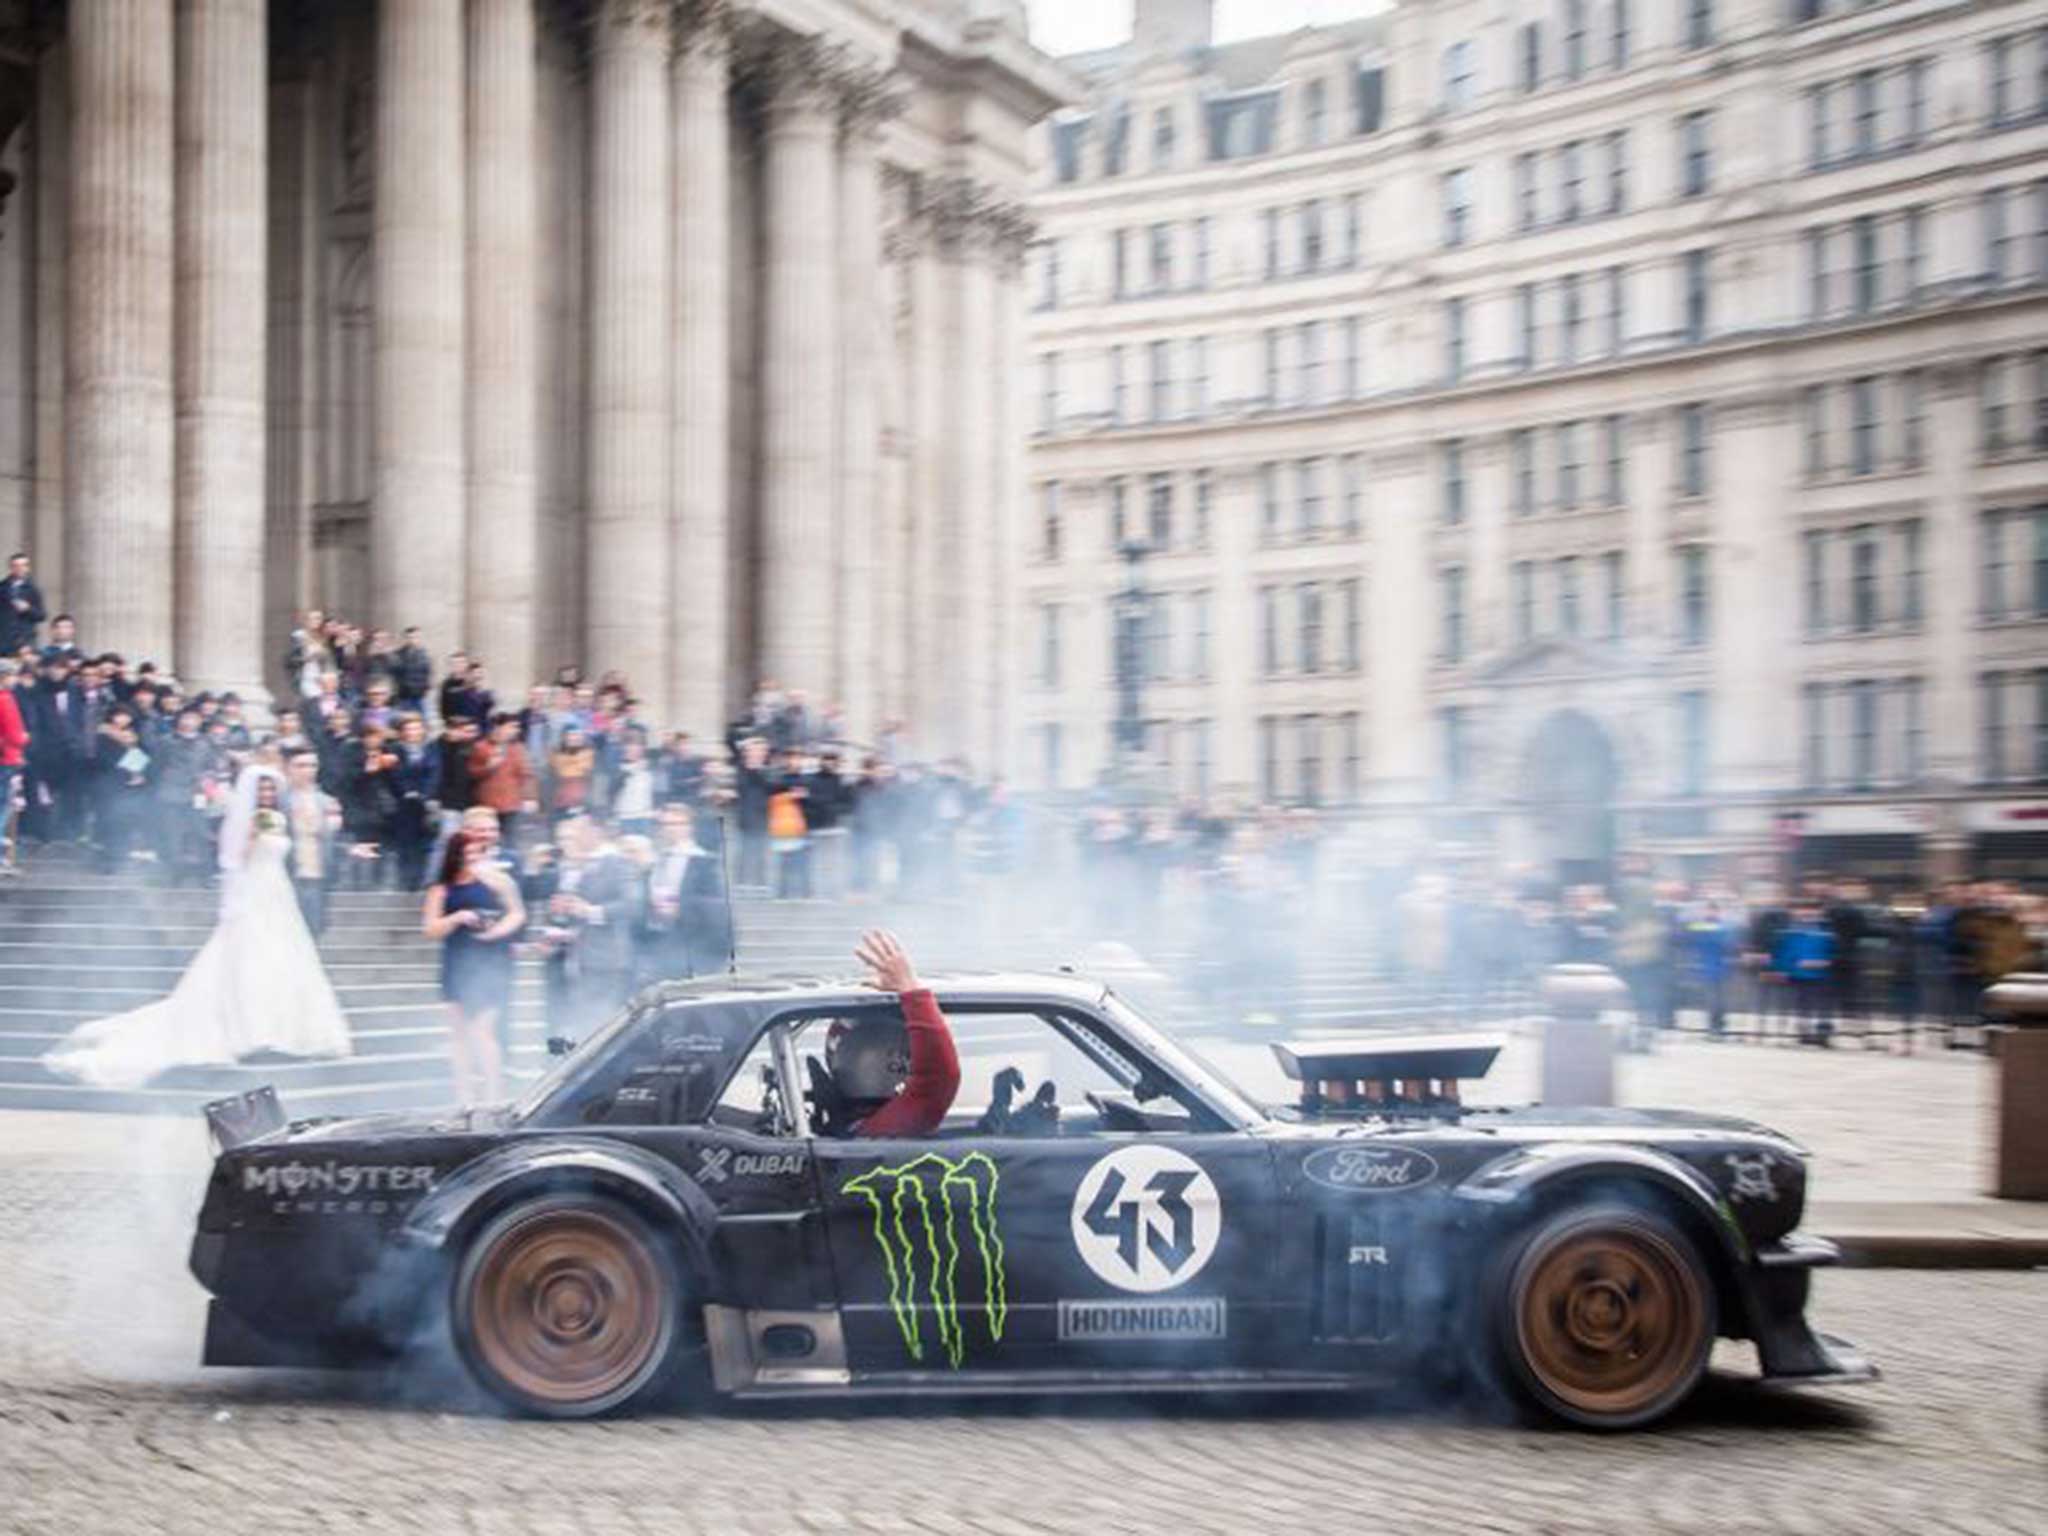 Top Gear host Matt LeBlanc waving to a bride and groom at St Paul's Cathedral in London